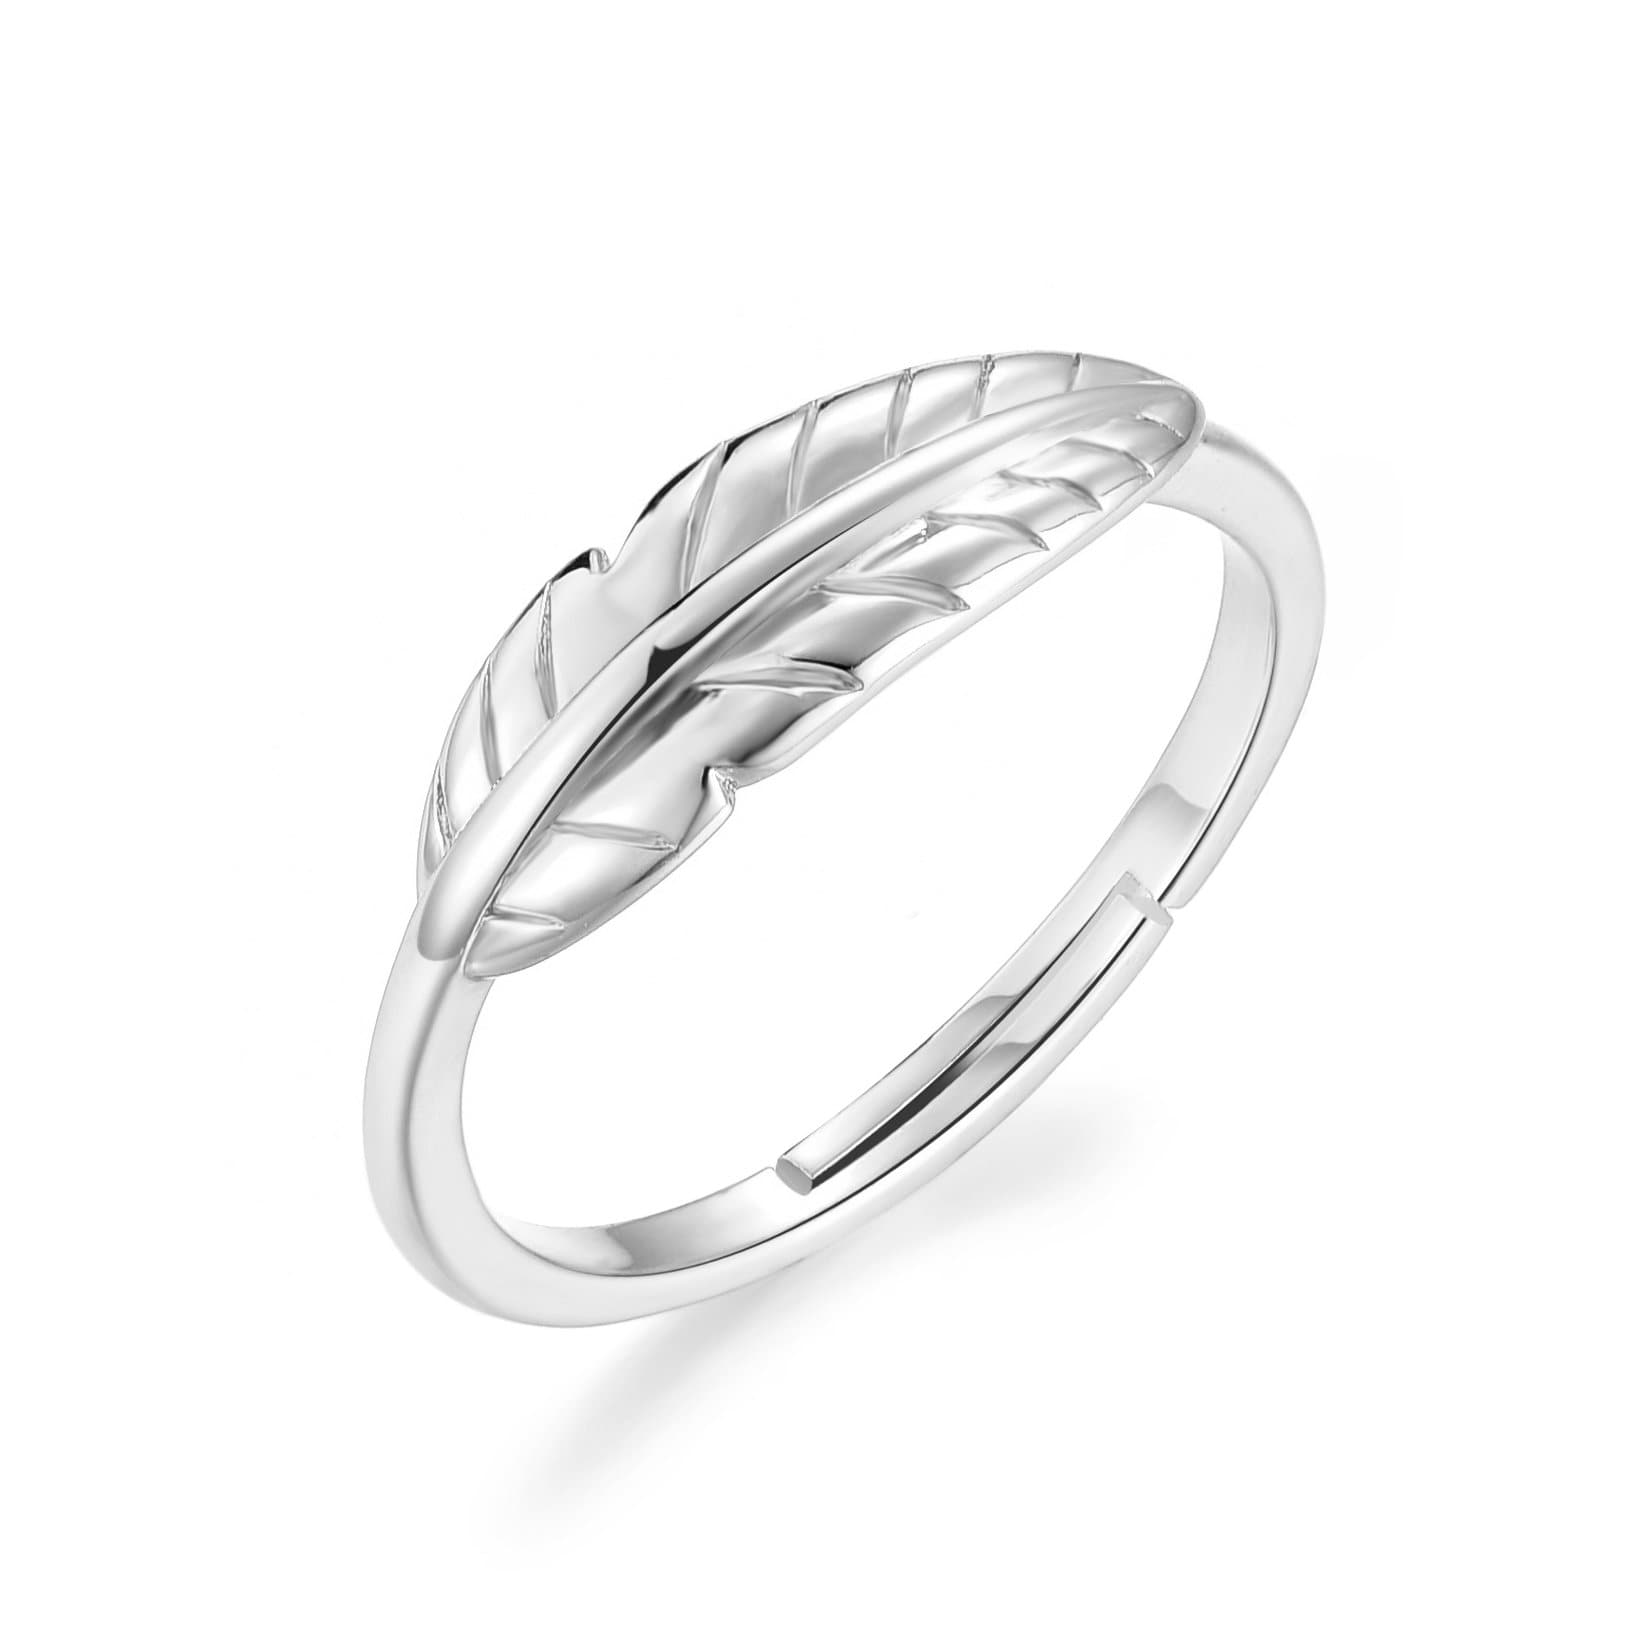 Silver Plated Feather Ring by Philip Jones Jewellery